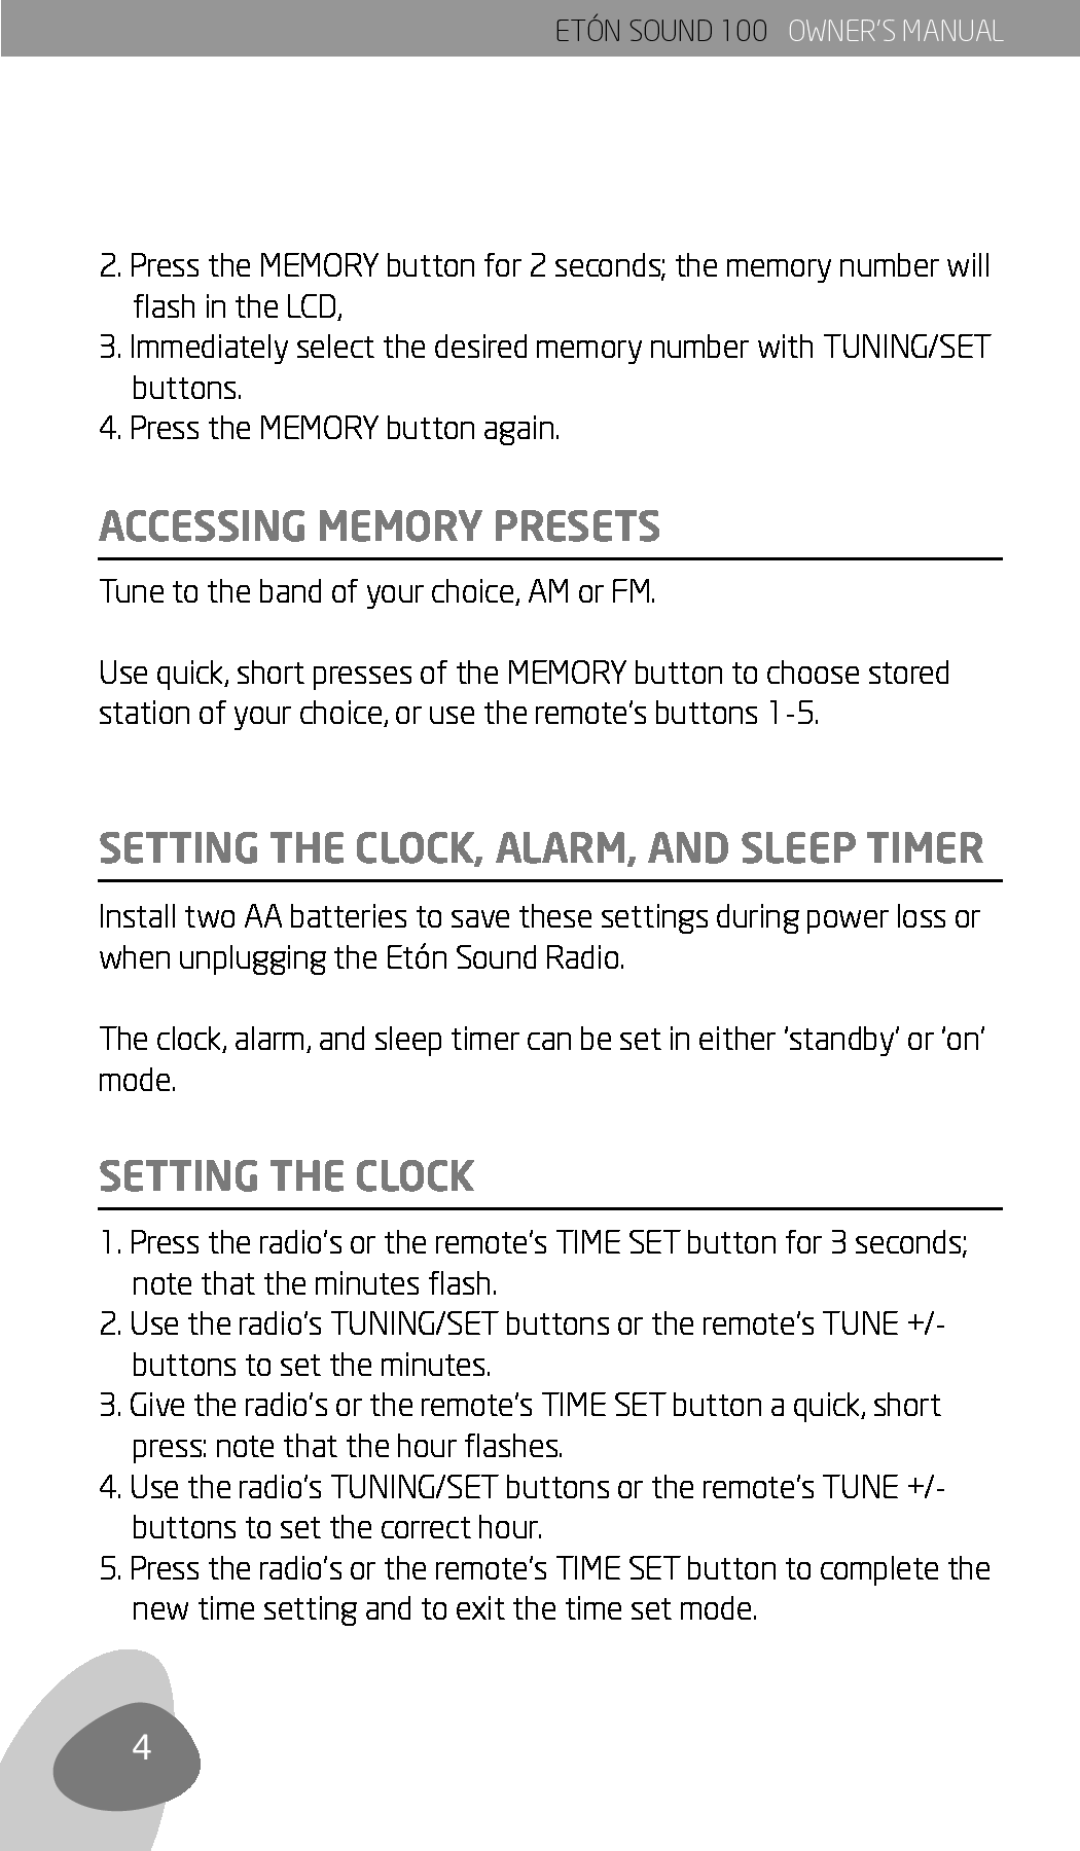 Eton Sound 100 owner manual Accessing Memory Presets, Setting The Clock, Alarm, And Sleep Timer 